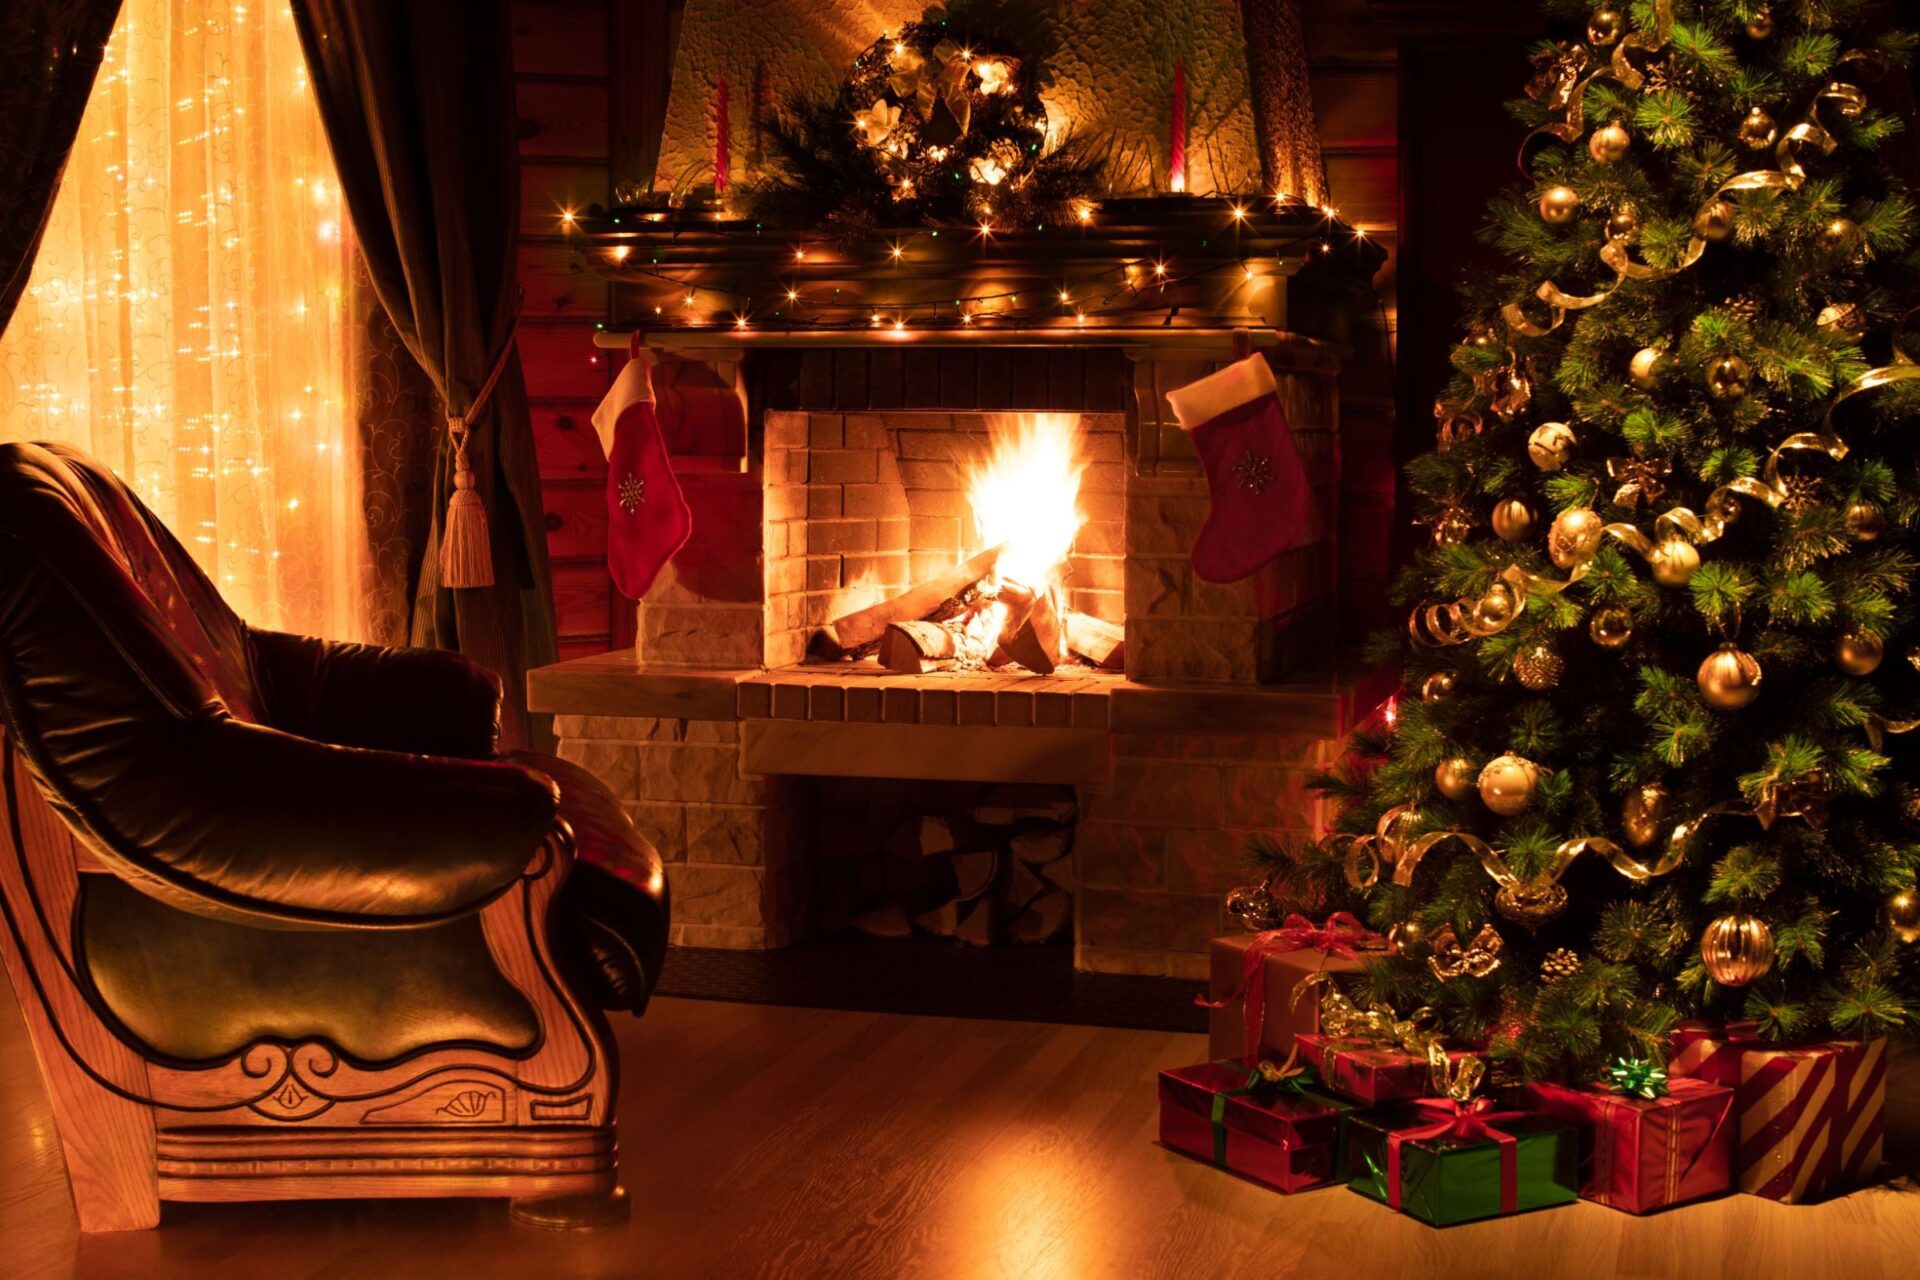 Don’t burn your Christmas tree in your fireplace!